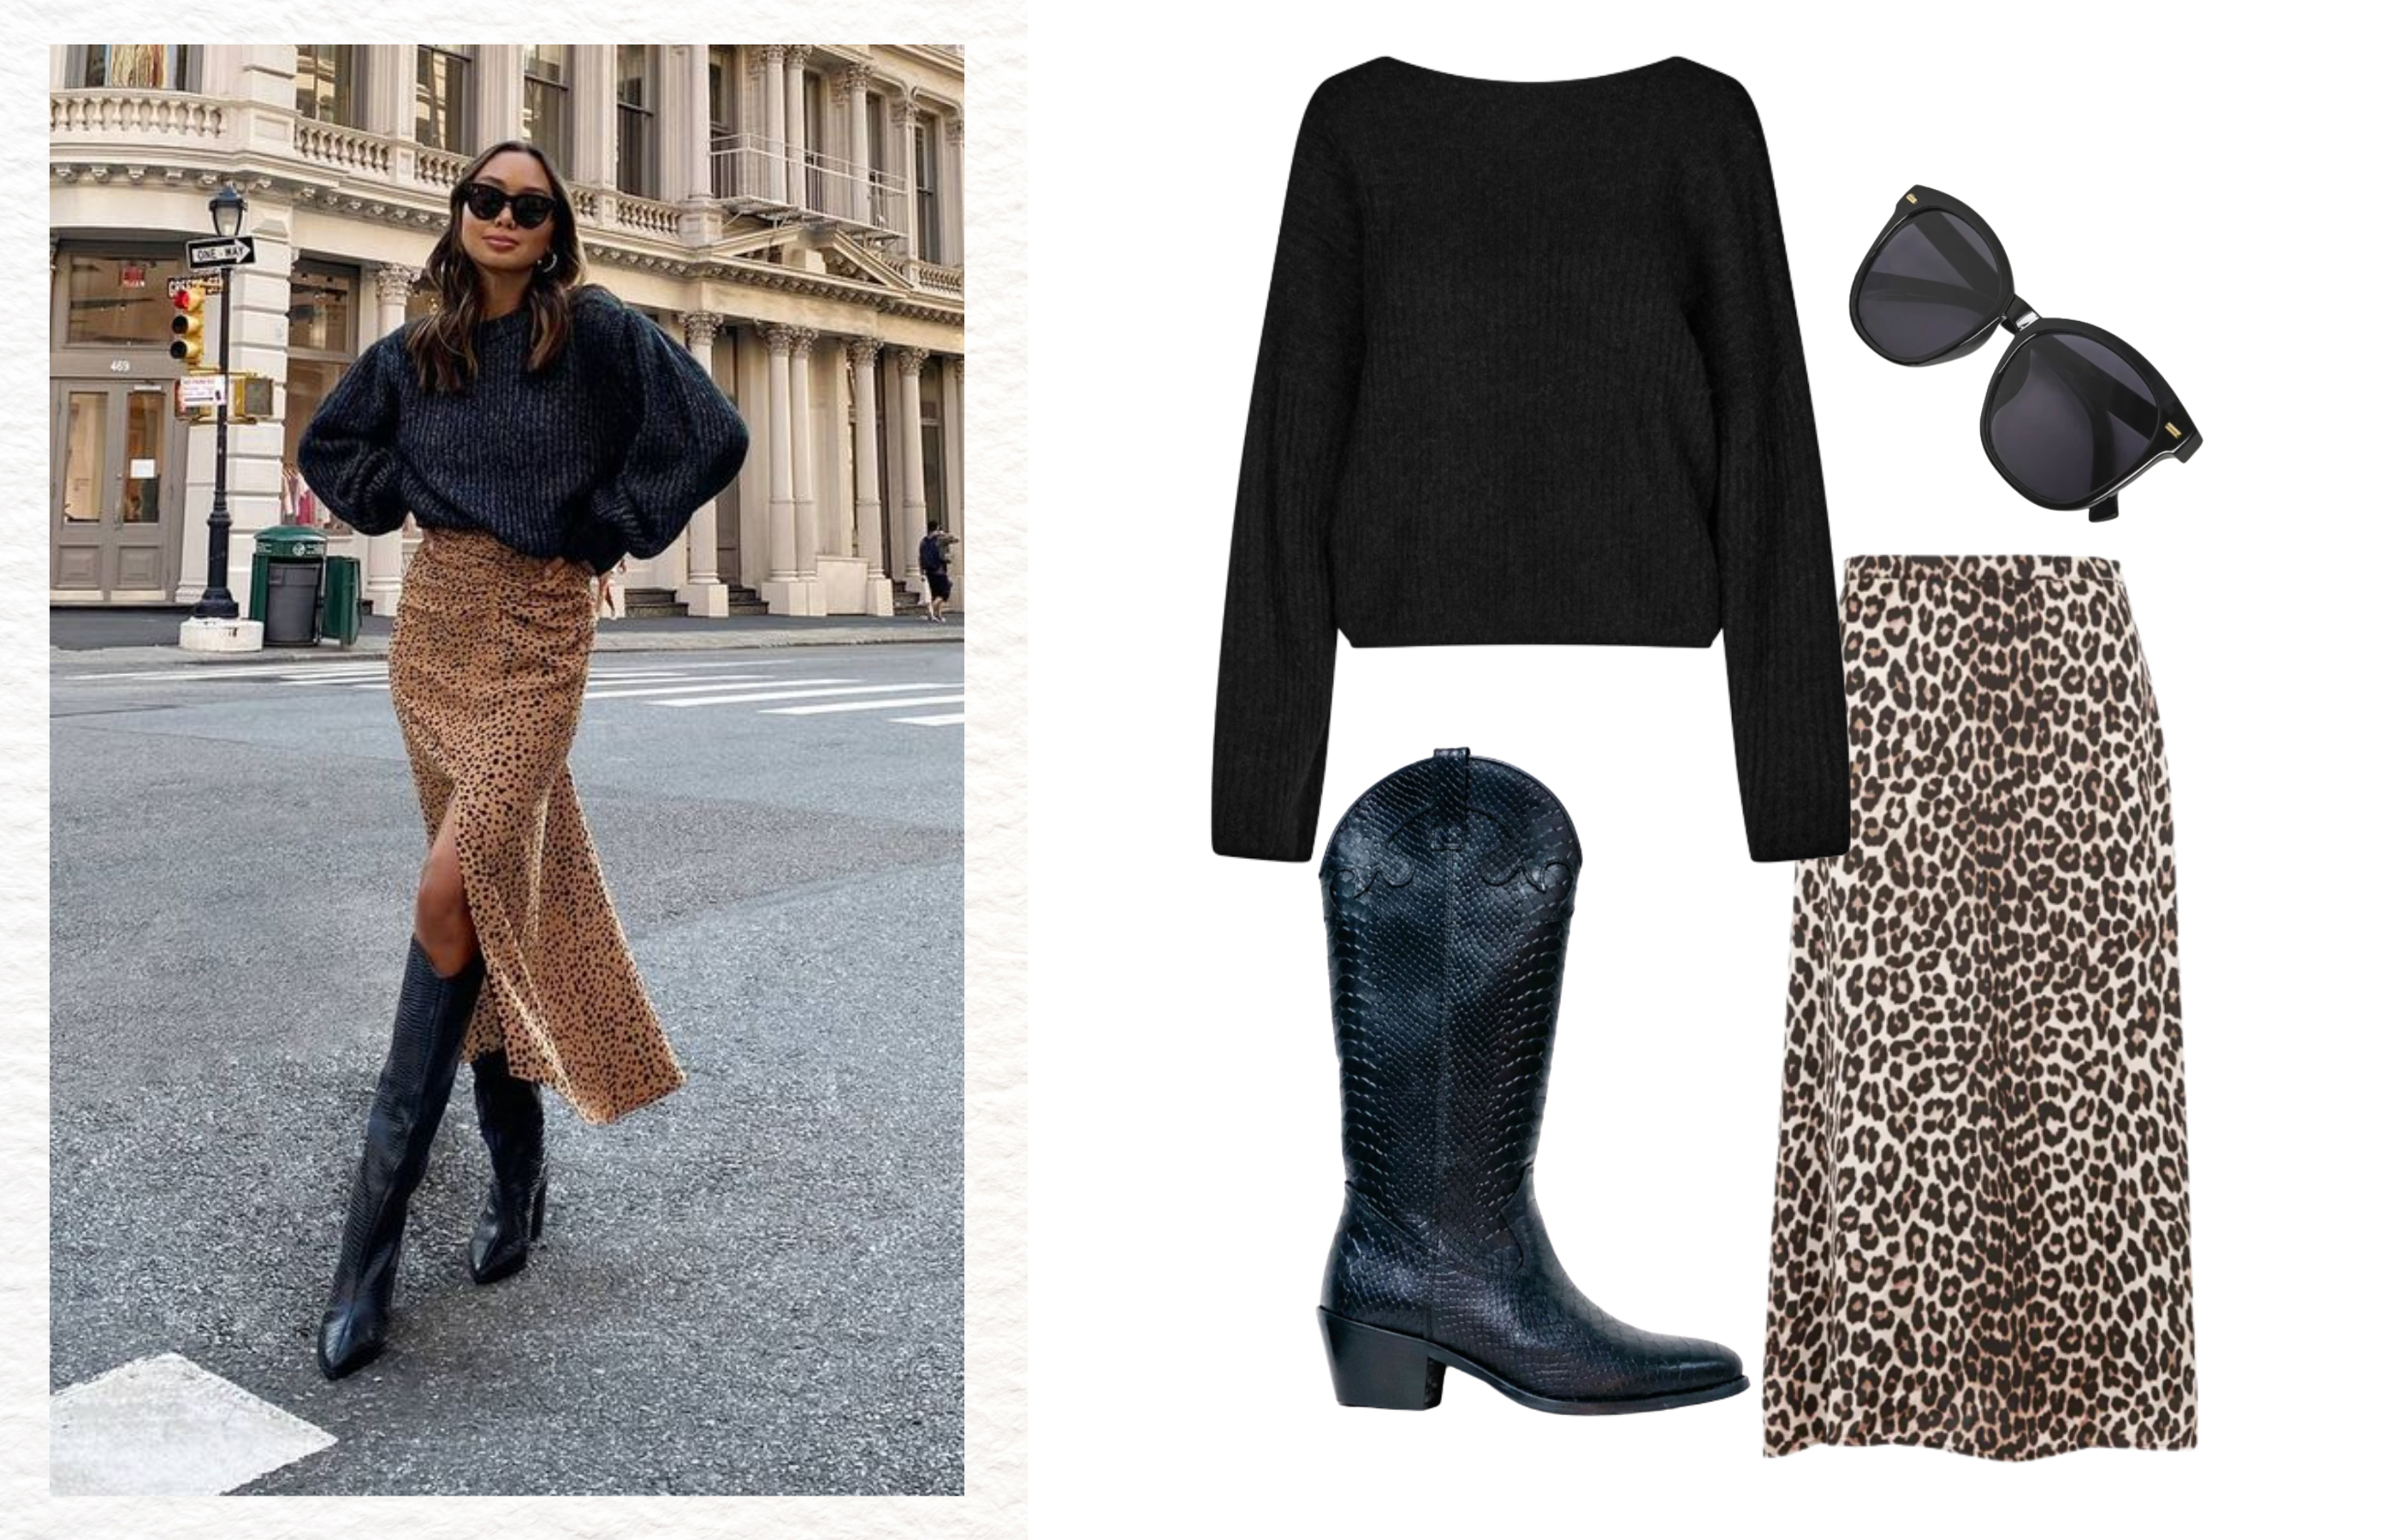 Outfit One - Leopard Skirt, Knit and Black Cowboy Boots